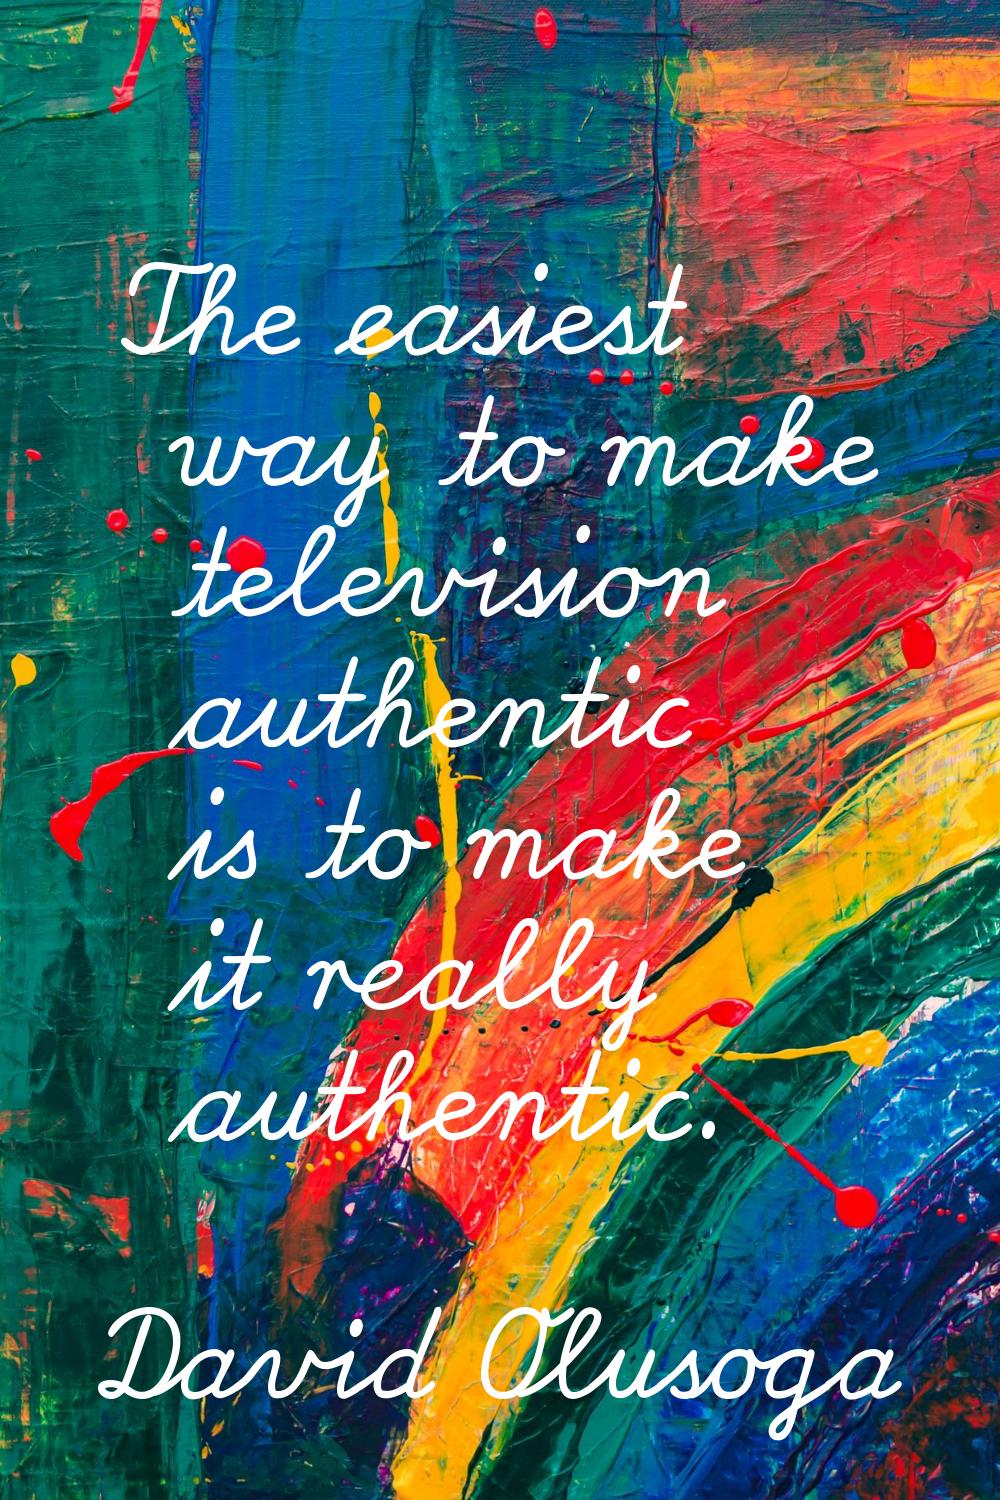 The easiest way to make television authentic is to make it really authentic.